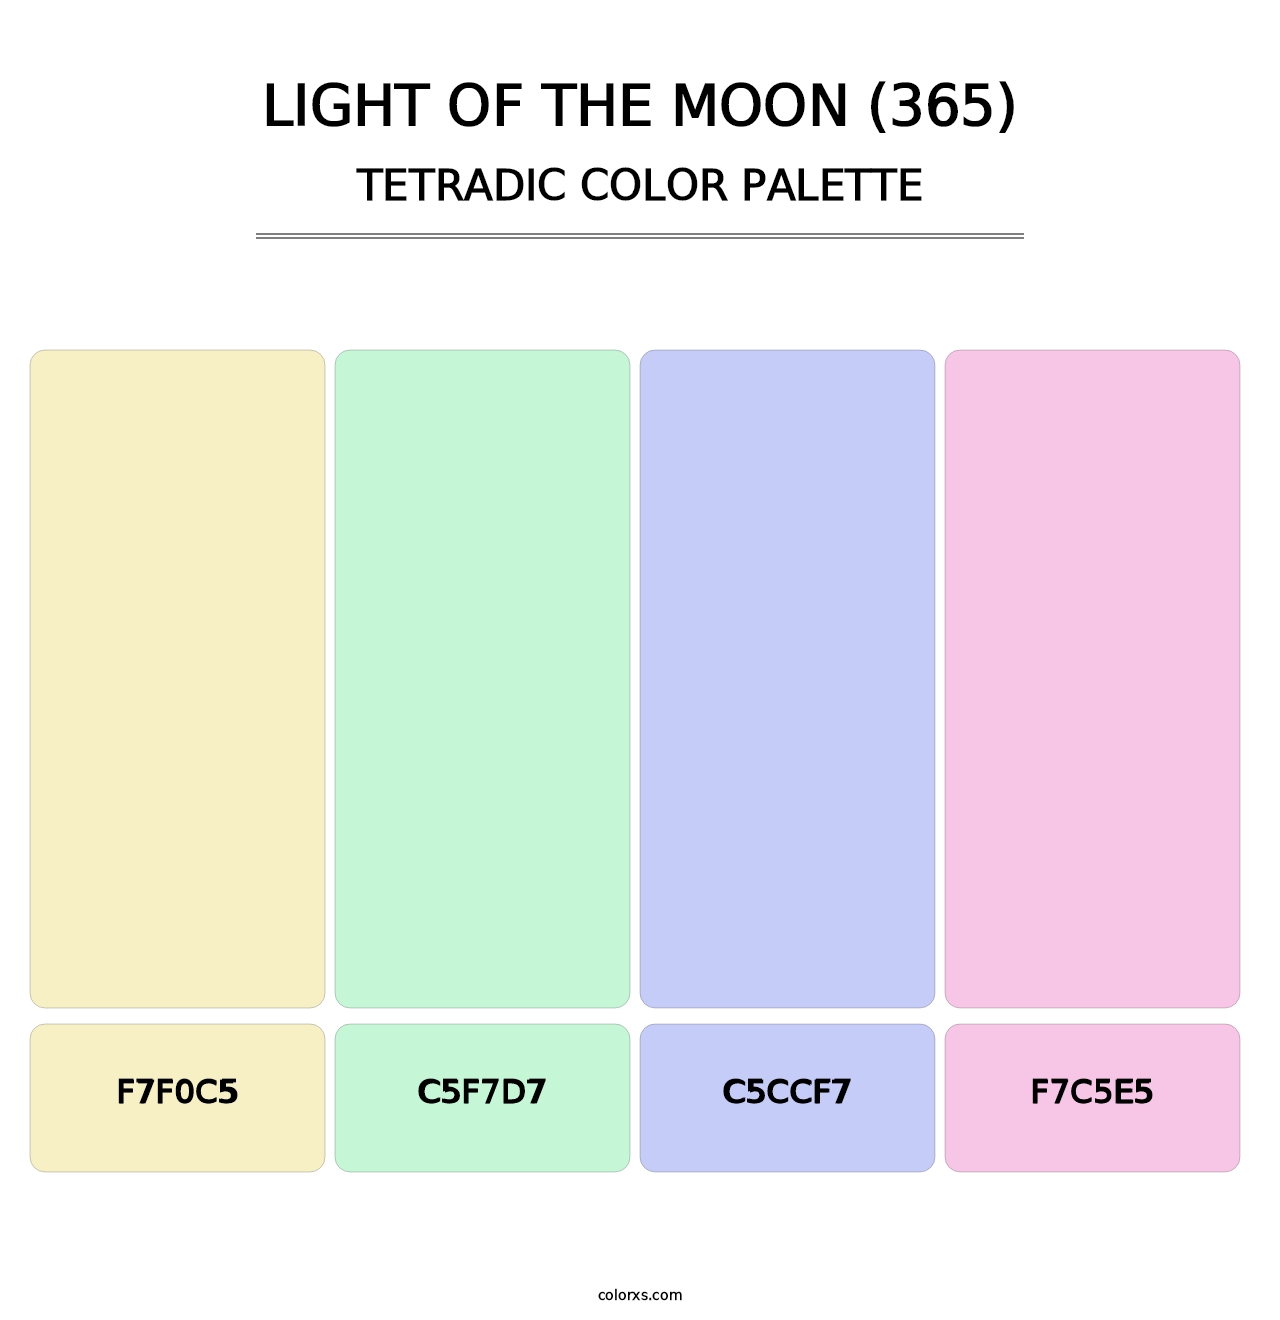 Light of the Moon (365) - Tetradic Color Palette